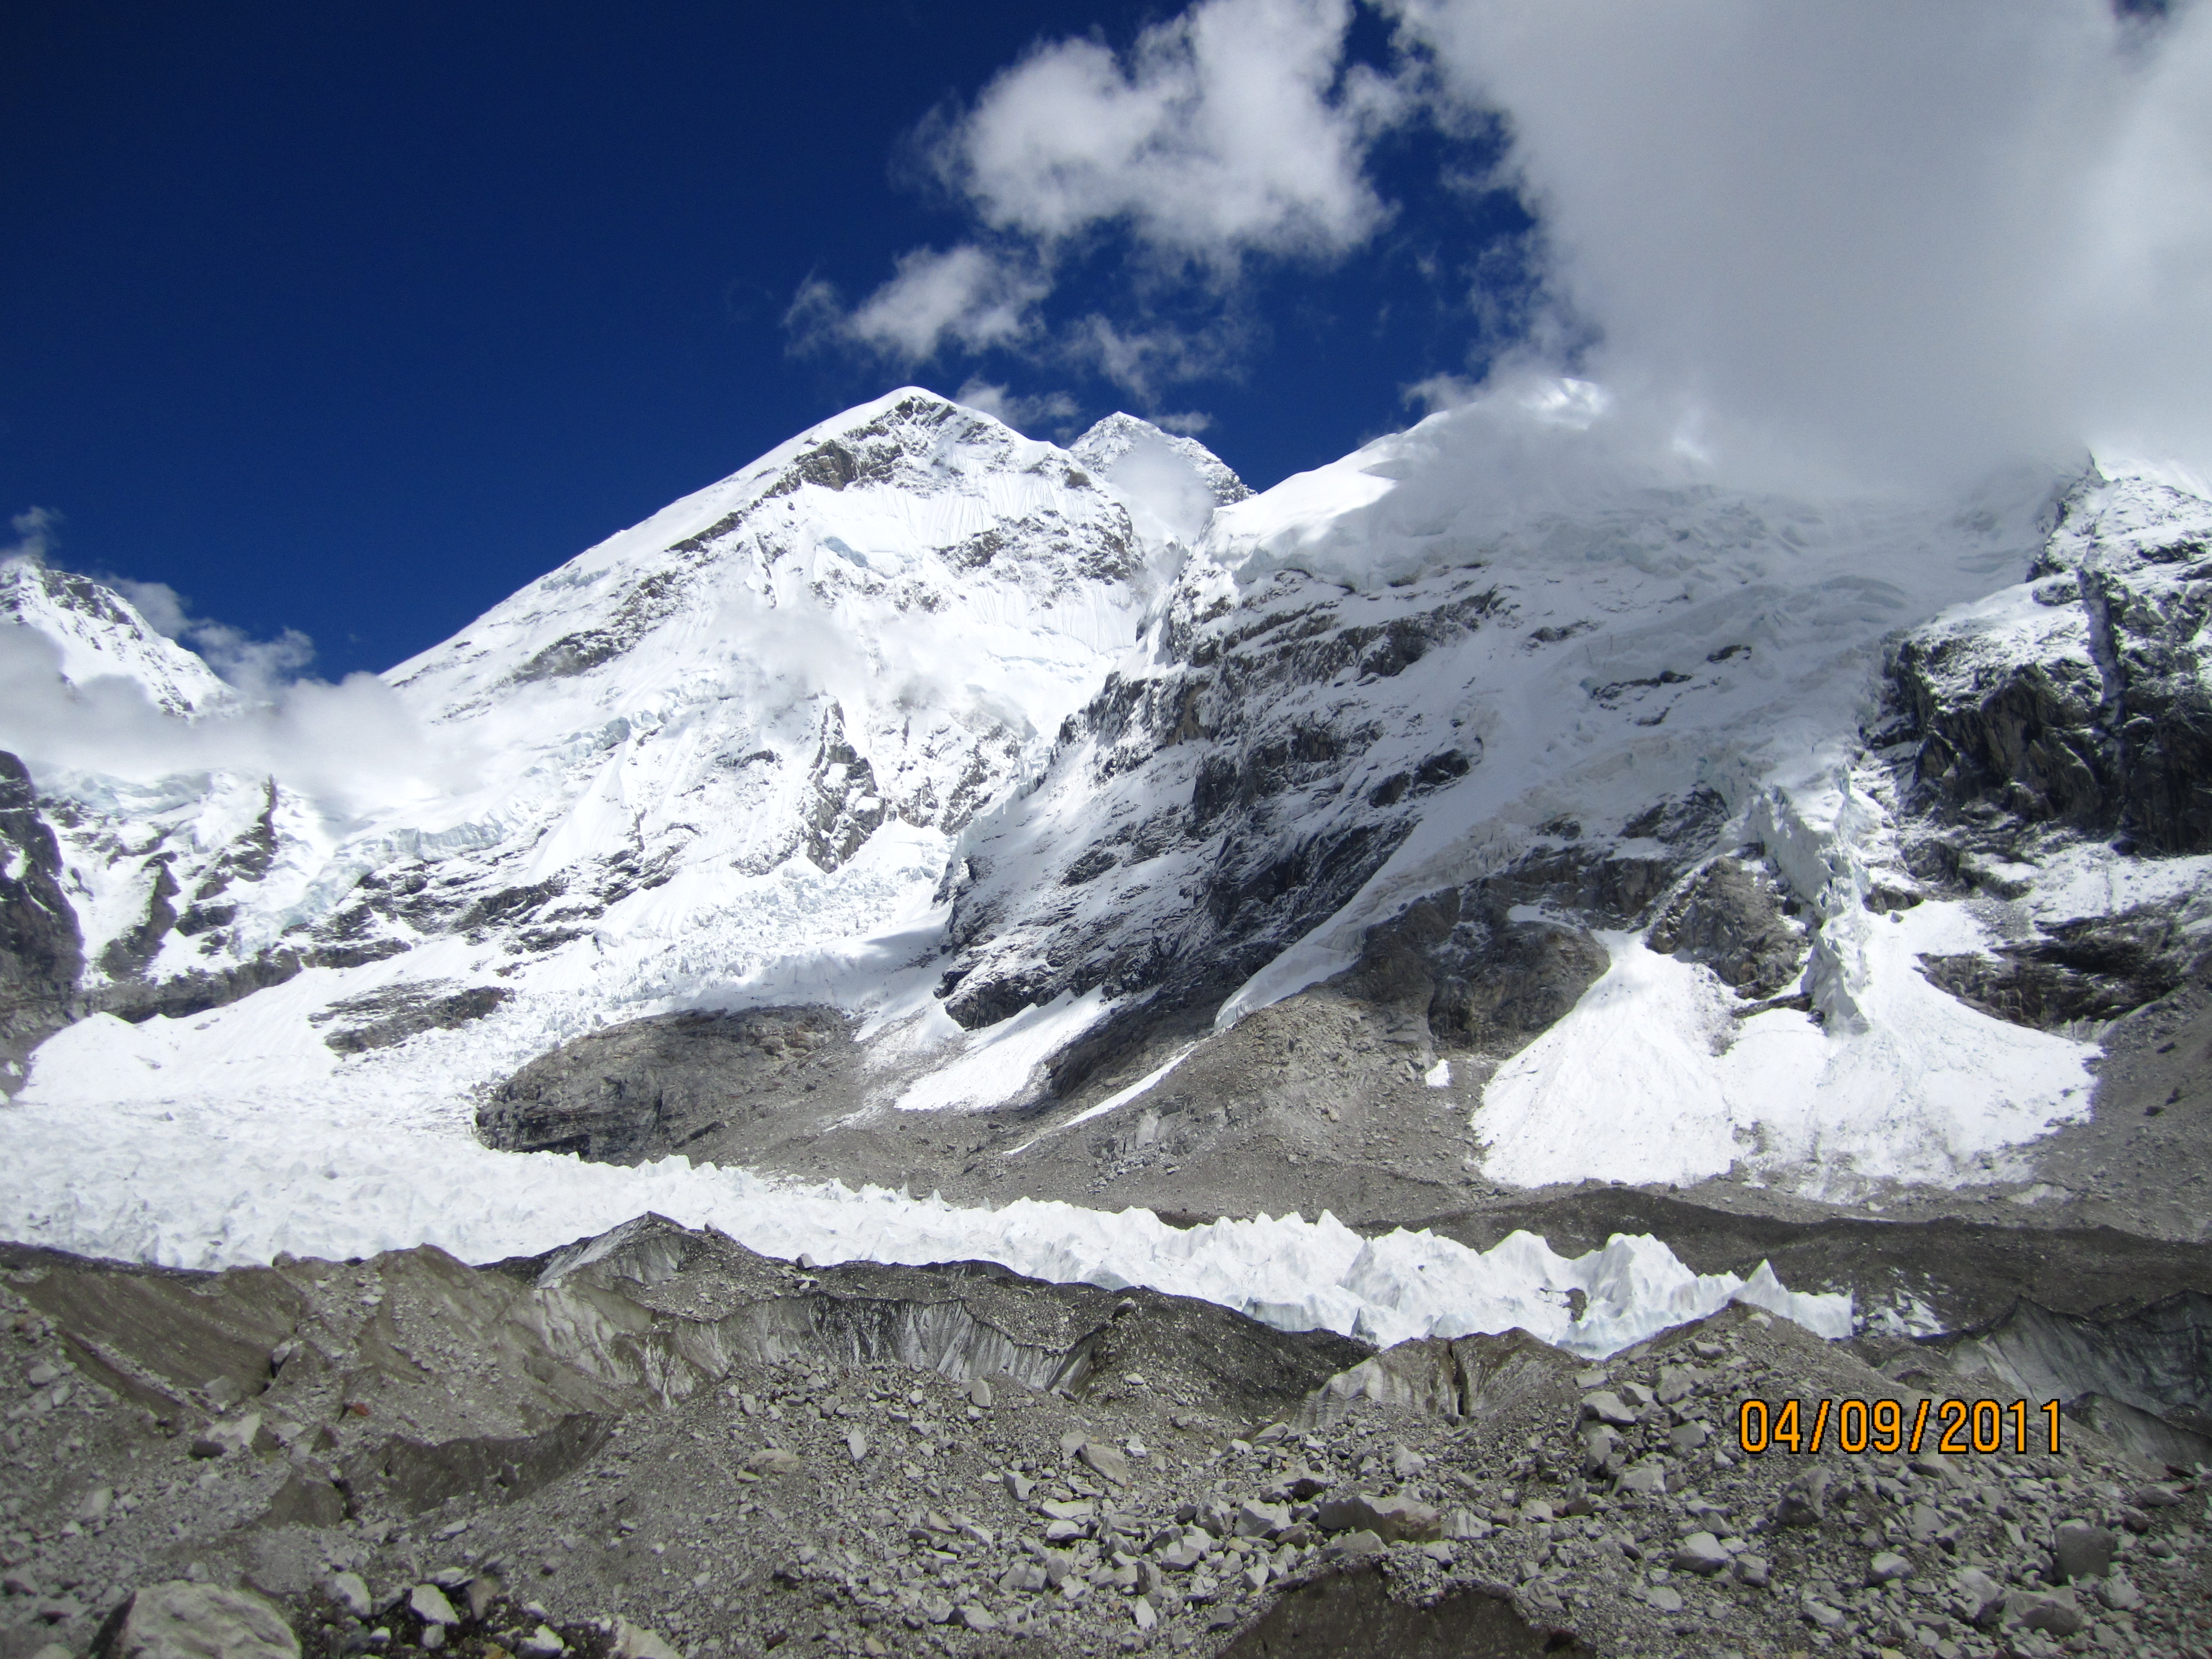 Hike to the Everest Base Camp (5,364 m/17,594 ft)